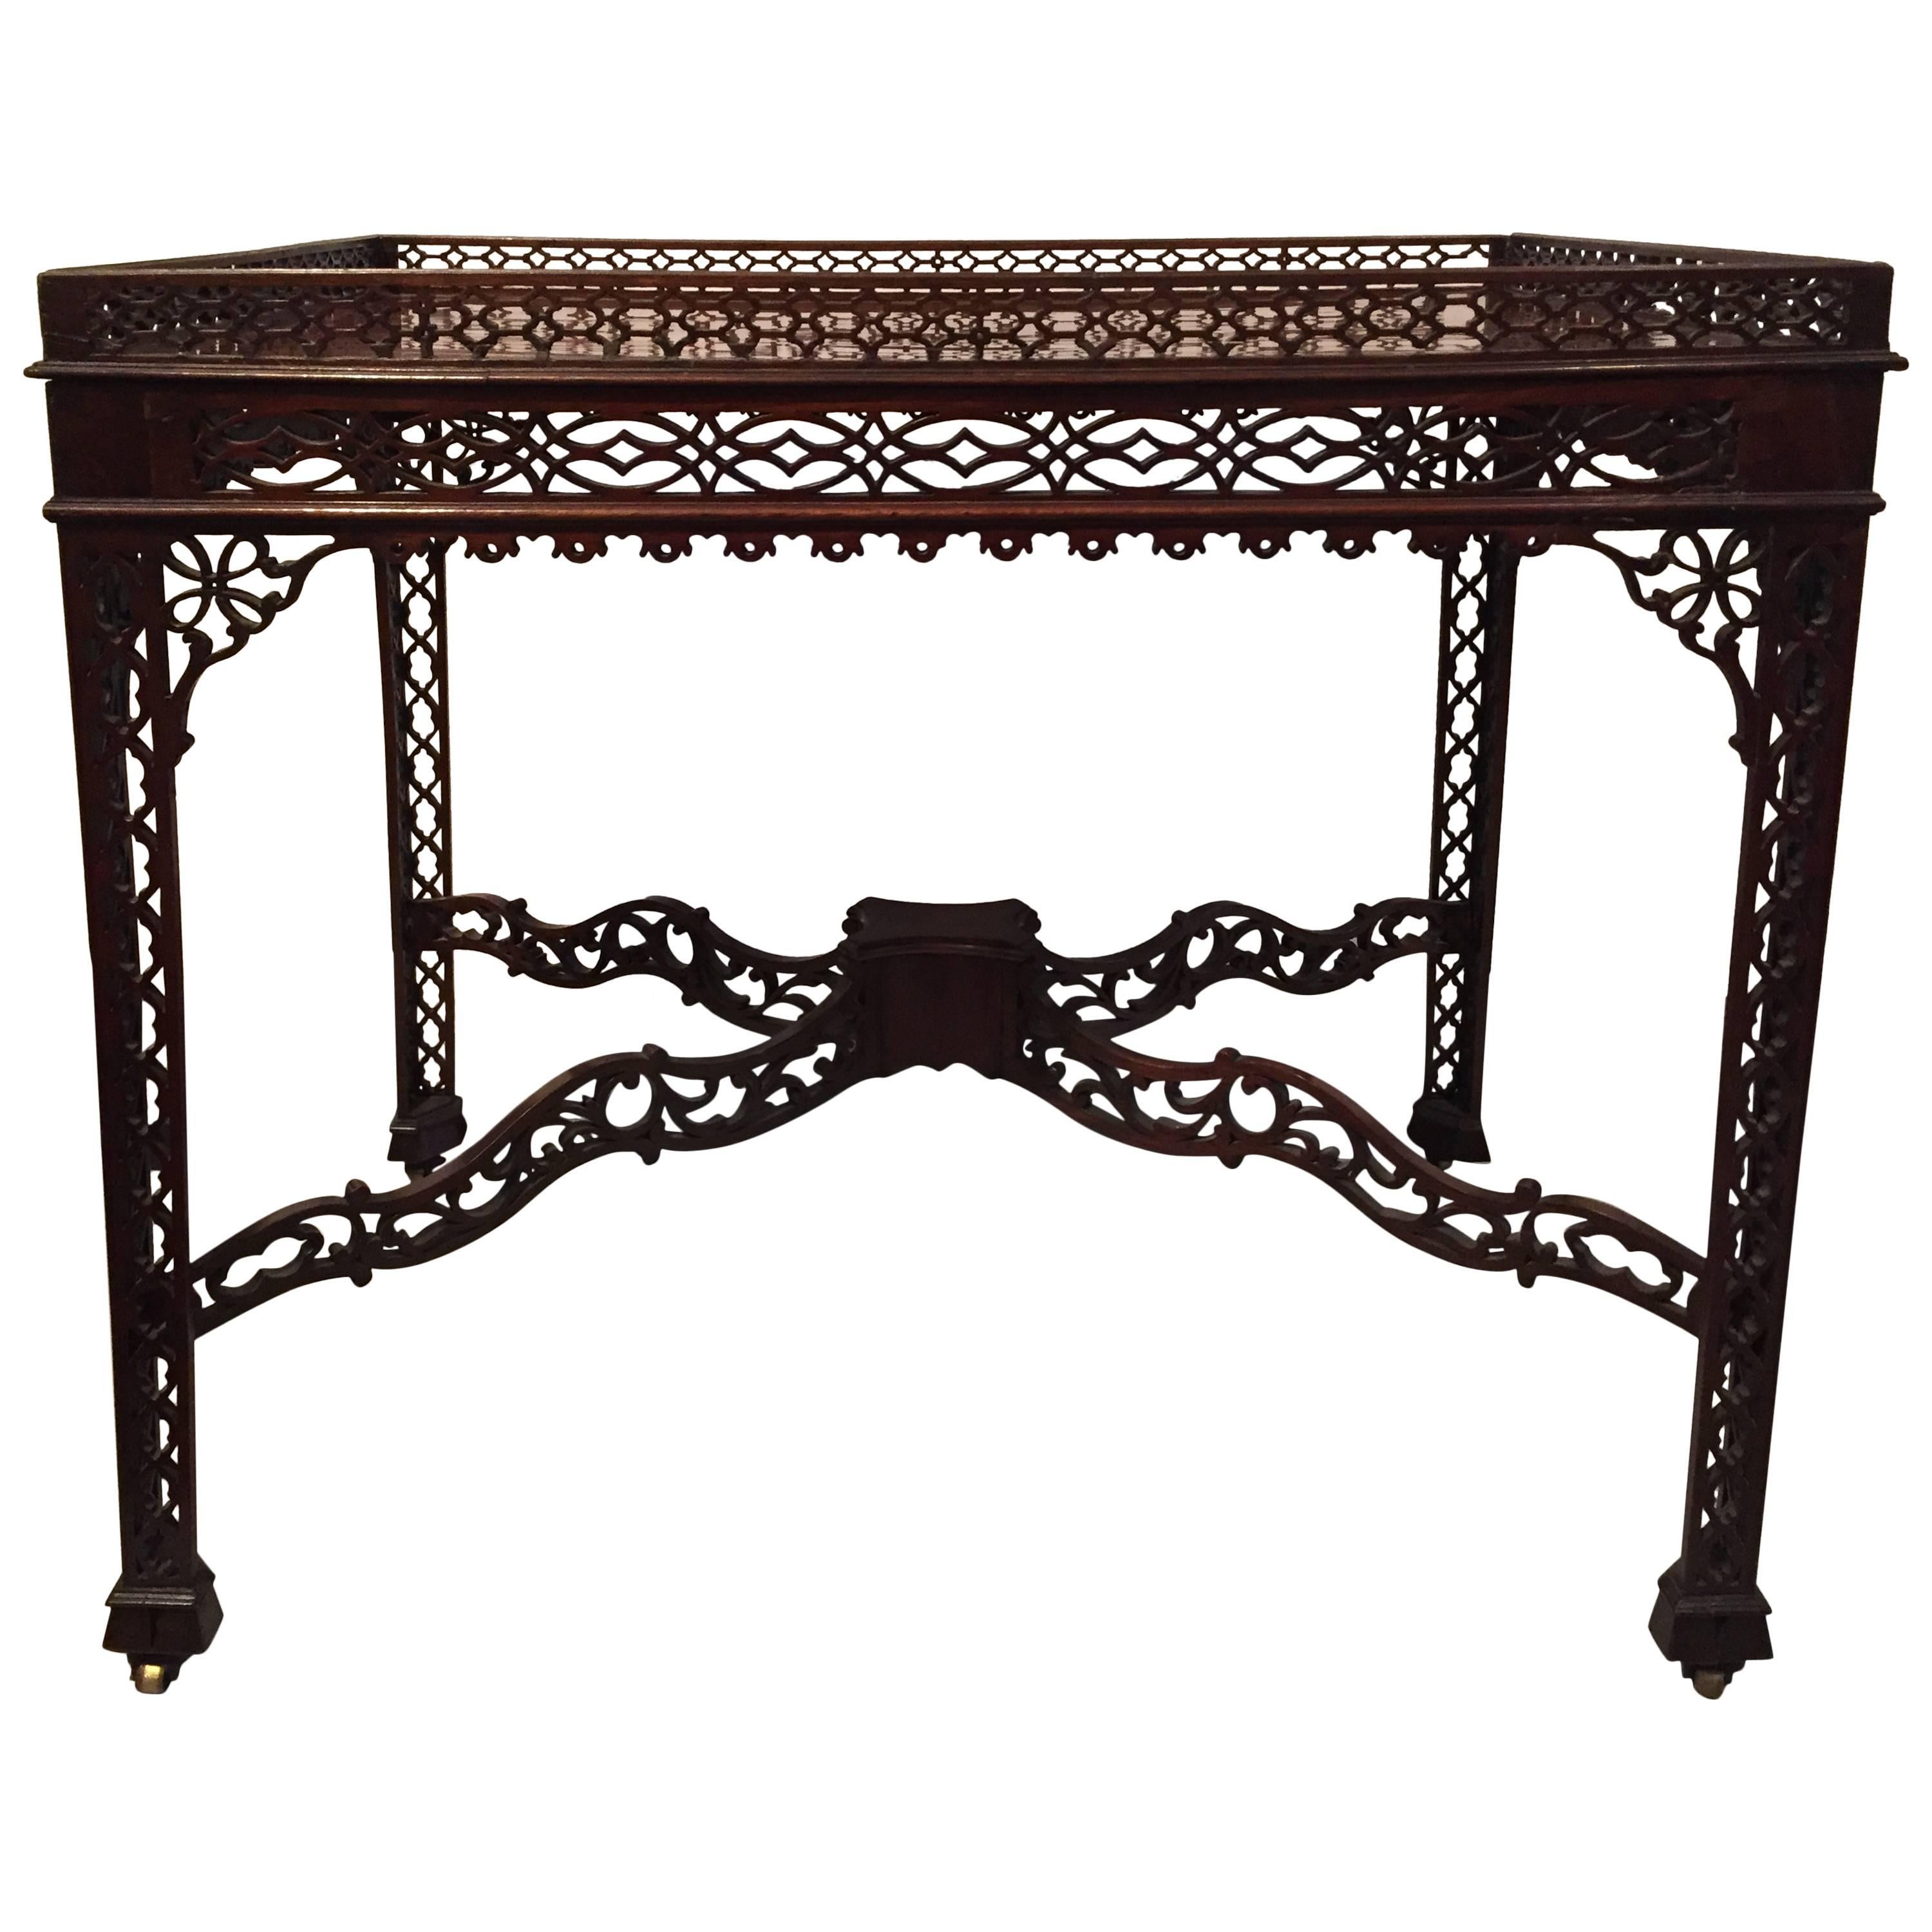 Chinese Chippendale Mahogany Tea/Coffee Table, circa 1790